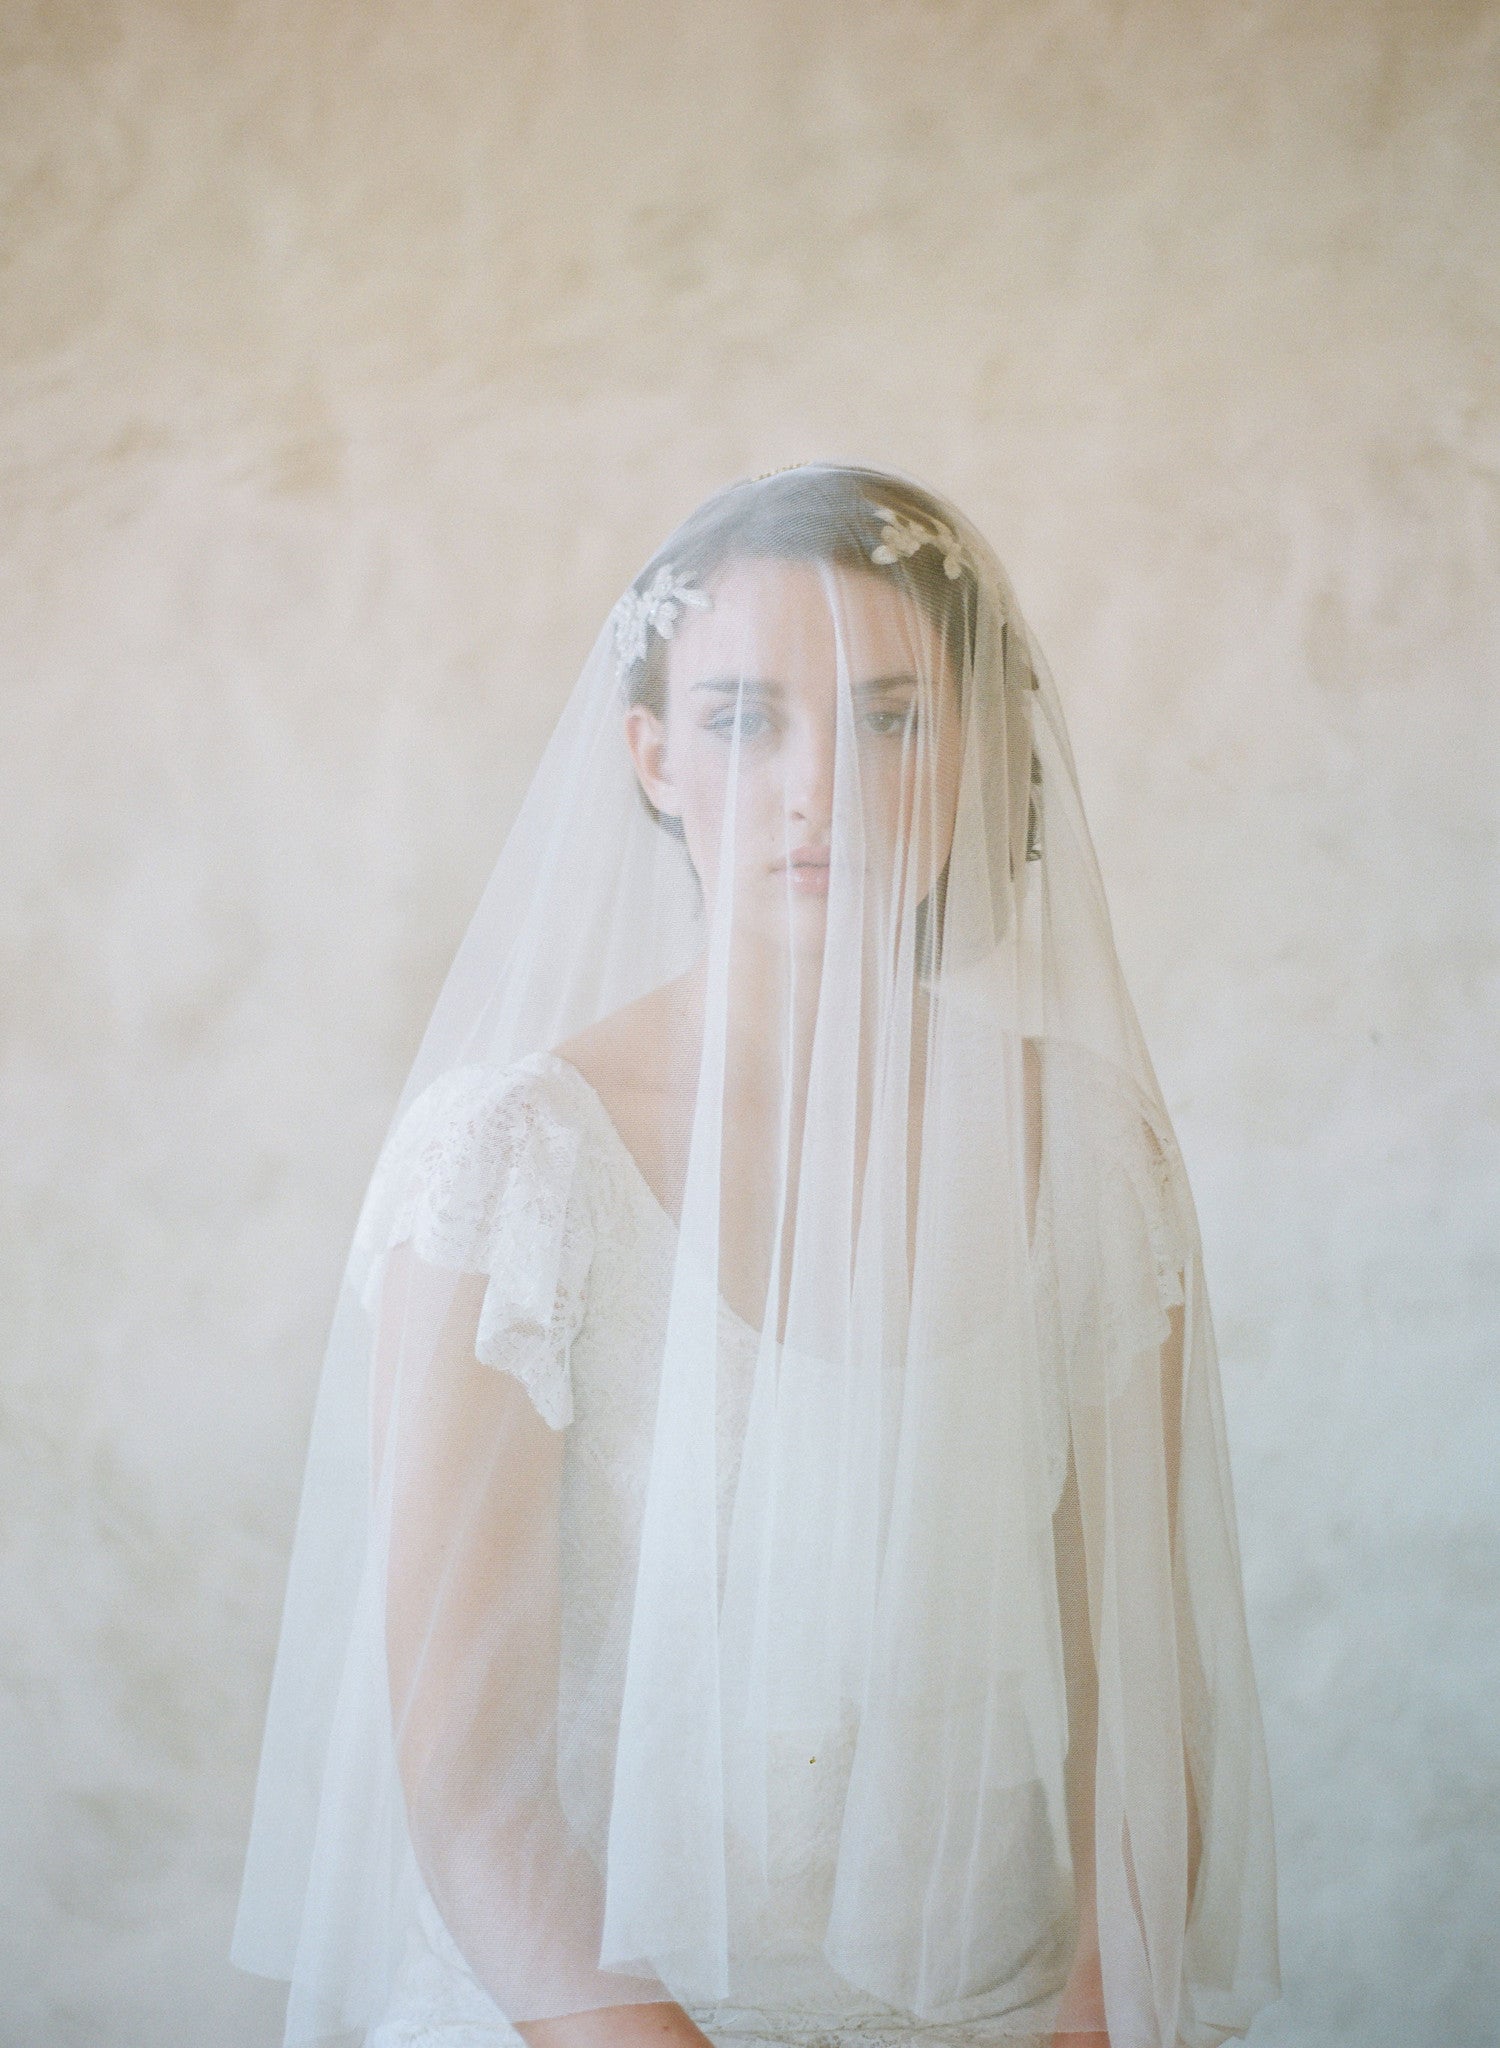 Lux tulle cathedral, chapel, fingertip length veil - Style #357lux